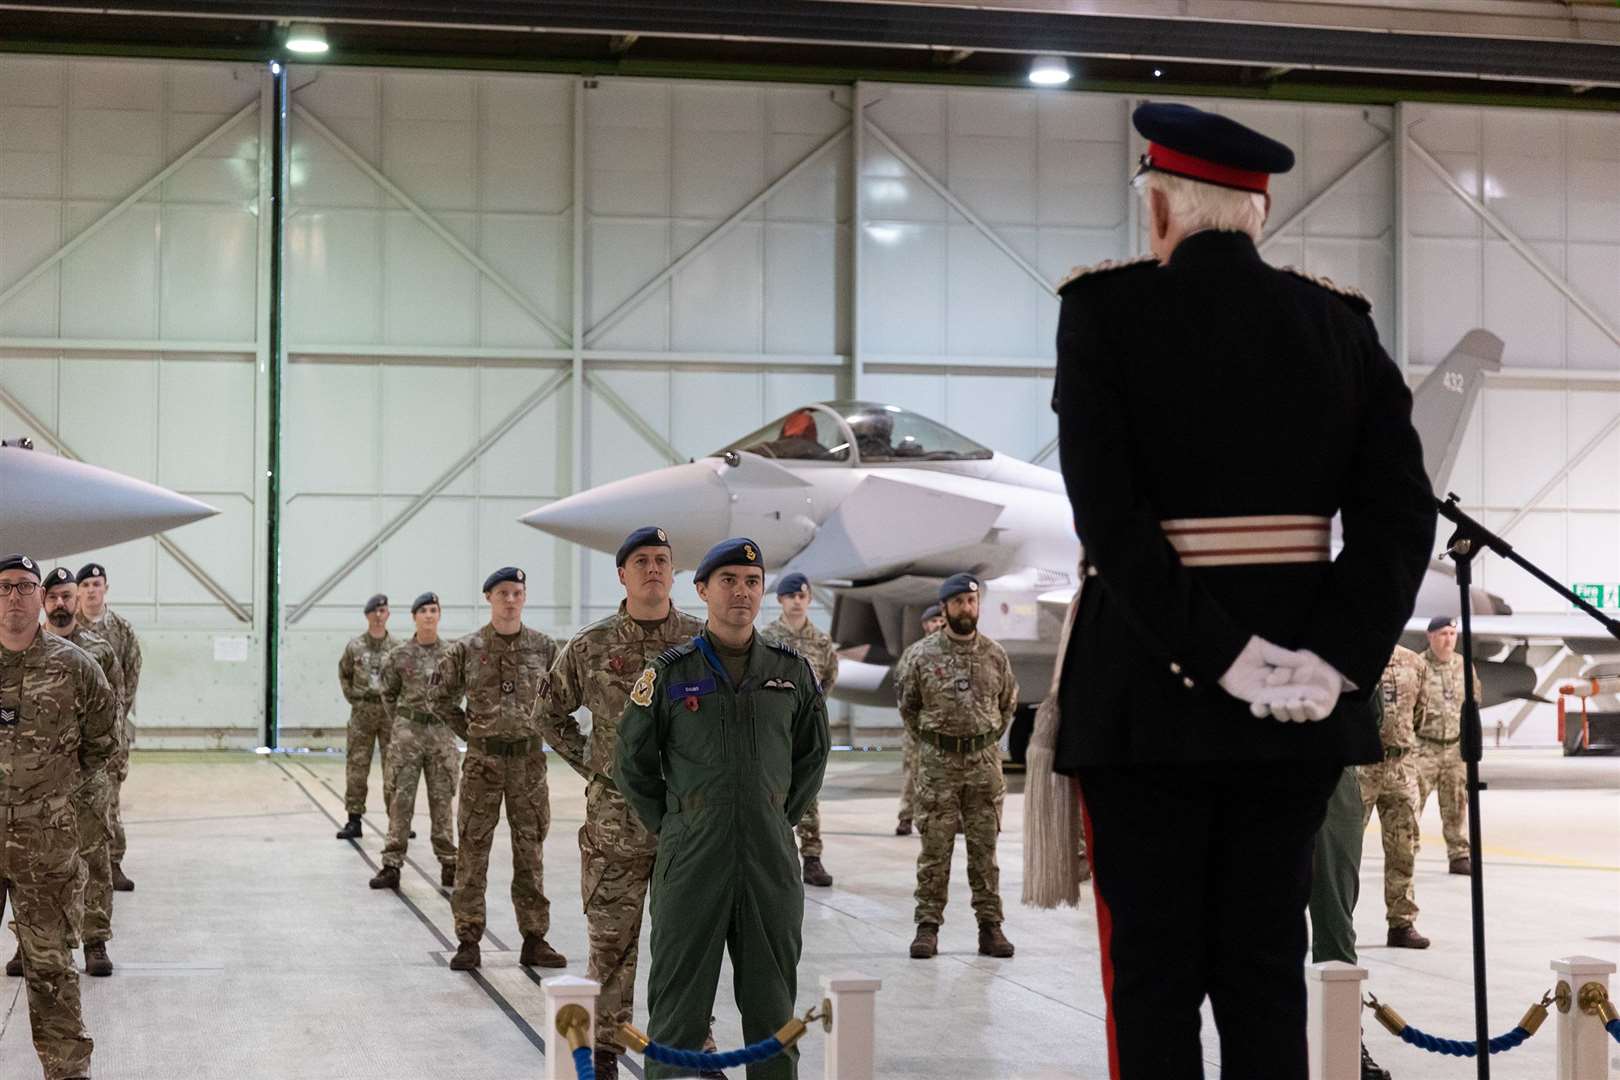 The Lord Lieutenant of Moray, Major General Seymour Monro, visits RAF Lossiemouth to present personnel with honours and awards at a presentation at No. 6 Squadron.